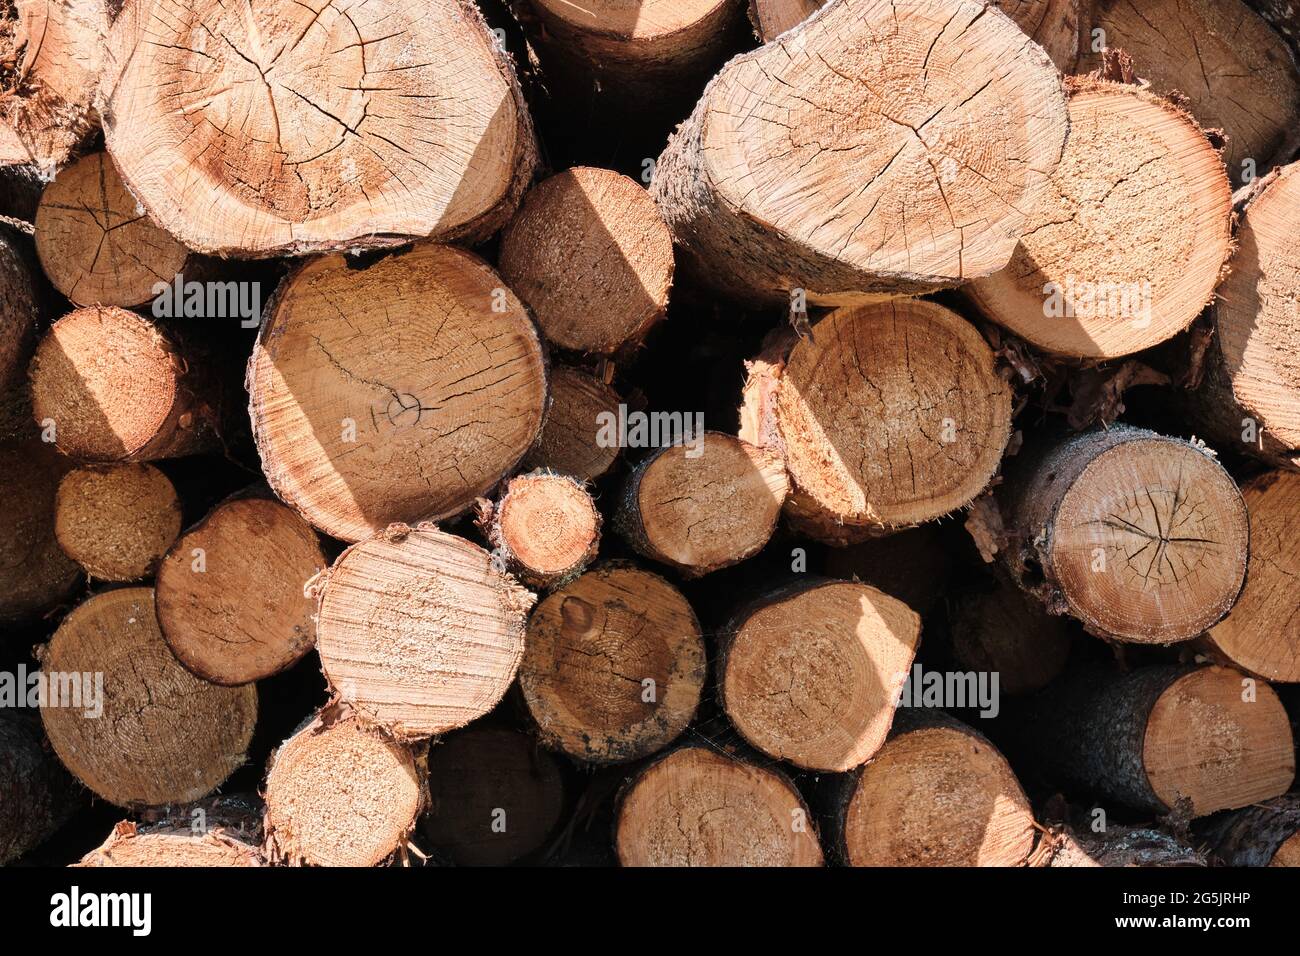 Pine logs. Wood processing industry. Environmental concerns. Sawed trees. Stock Photo